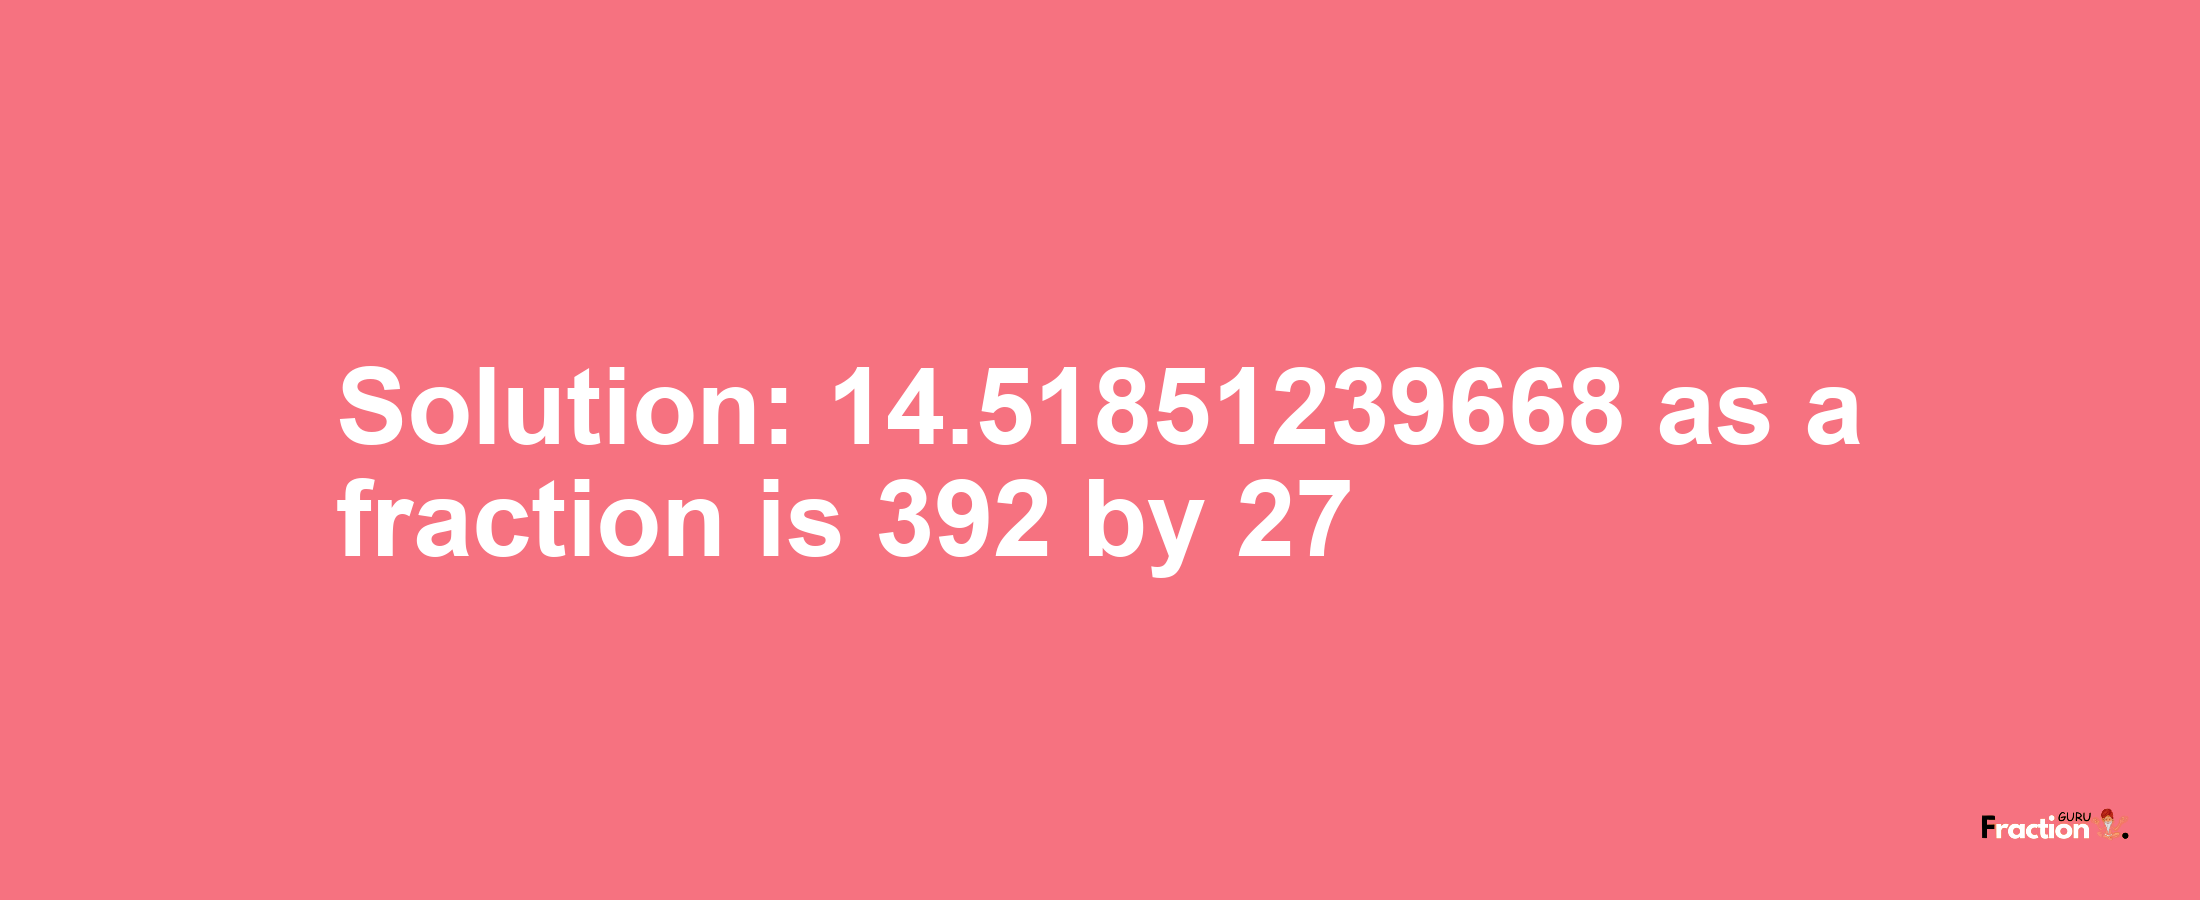 Solution:14.51851239668 as a fraction is 392/27